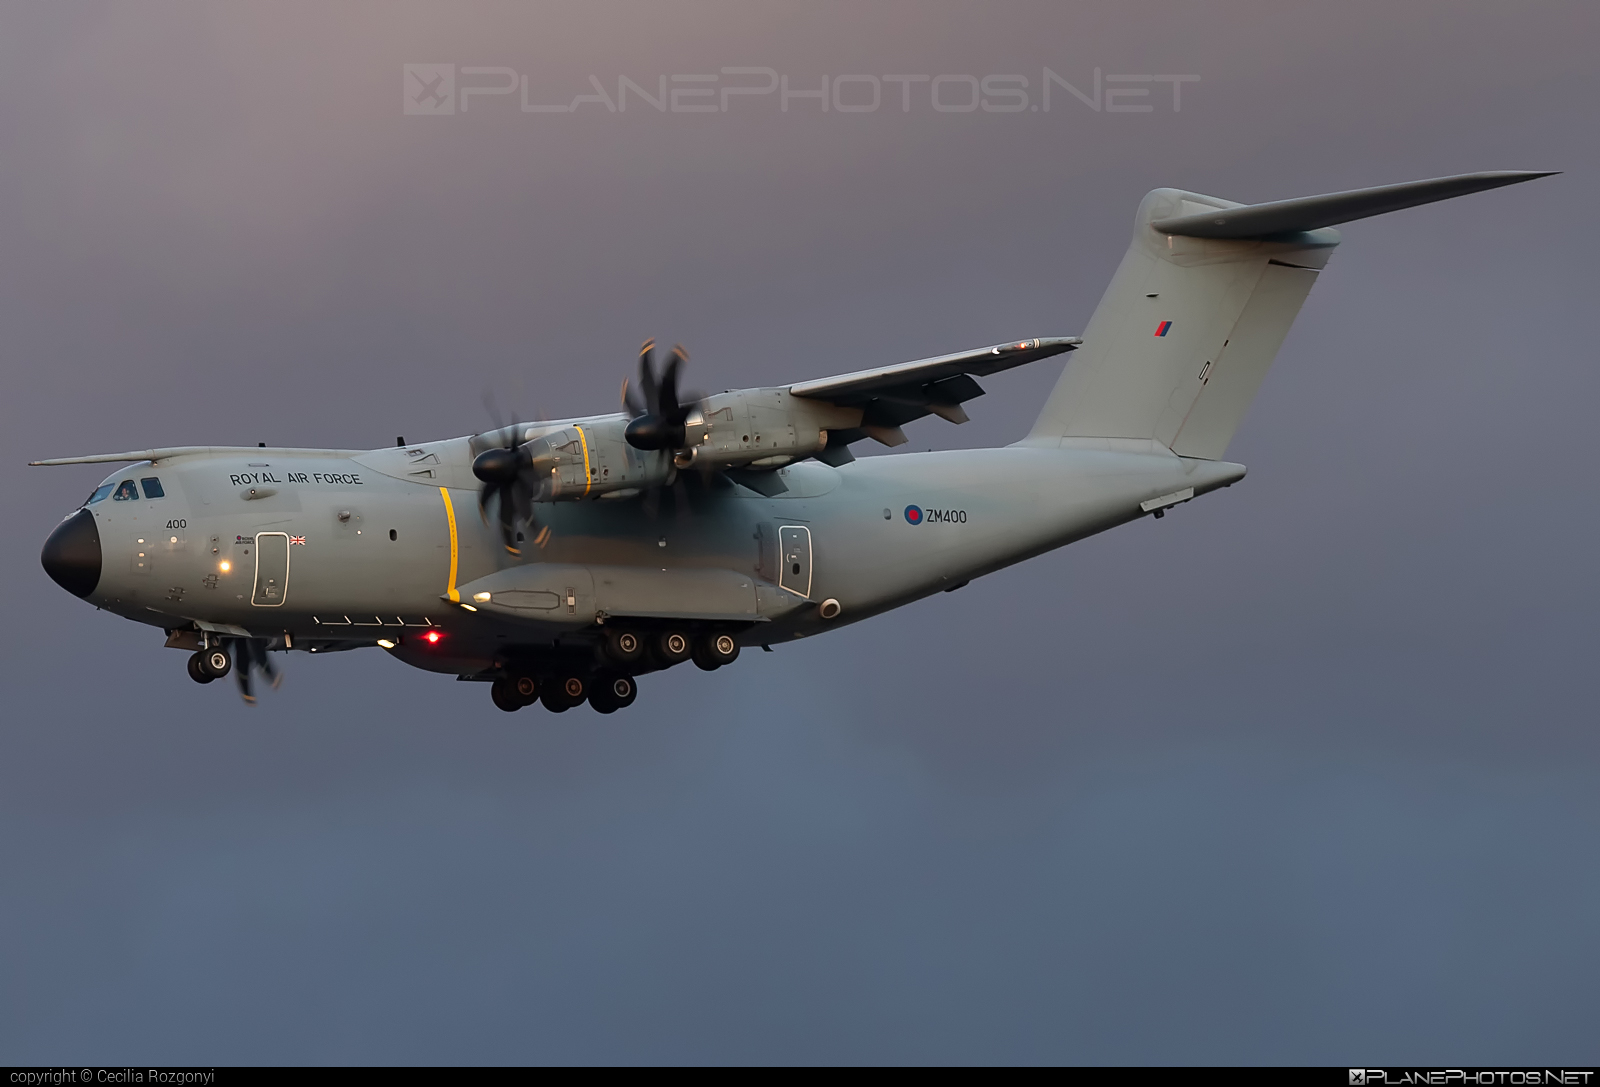 Airbus A400M Atlas C1 - ZM400 operated by Royal Air Force (RAF) #a400 #a400m #airbus #airbusa400m #airbusa400matlas #atlasc1 #raf #royalAirForce